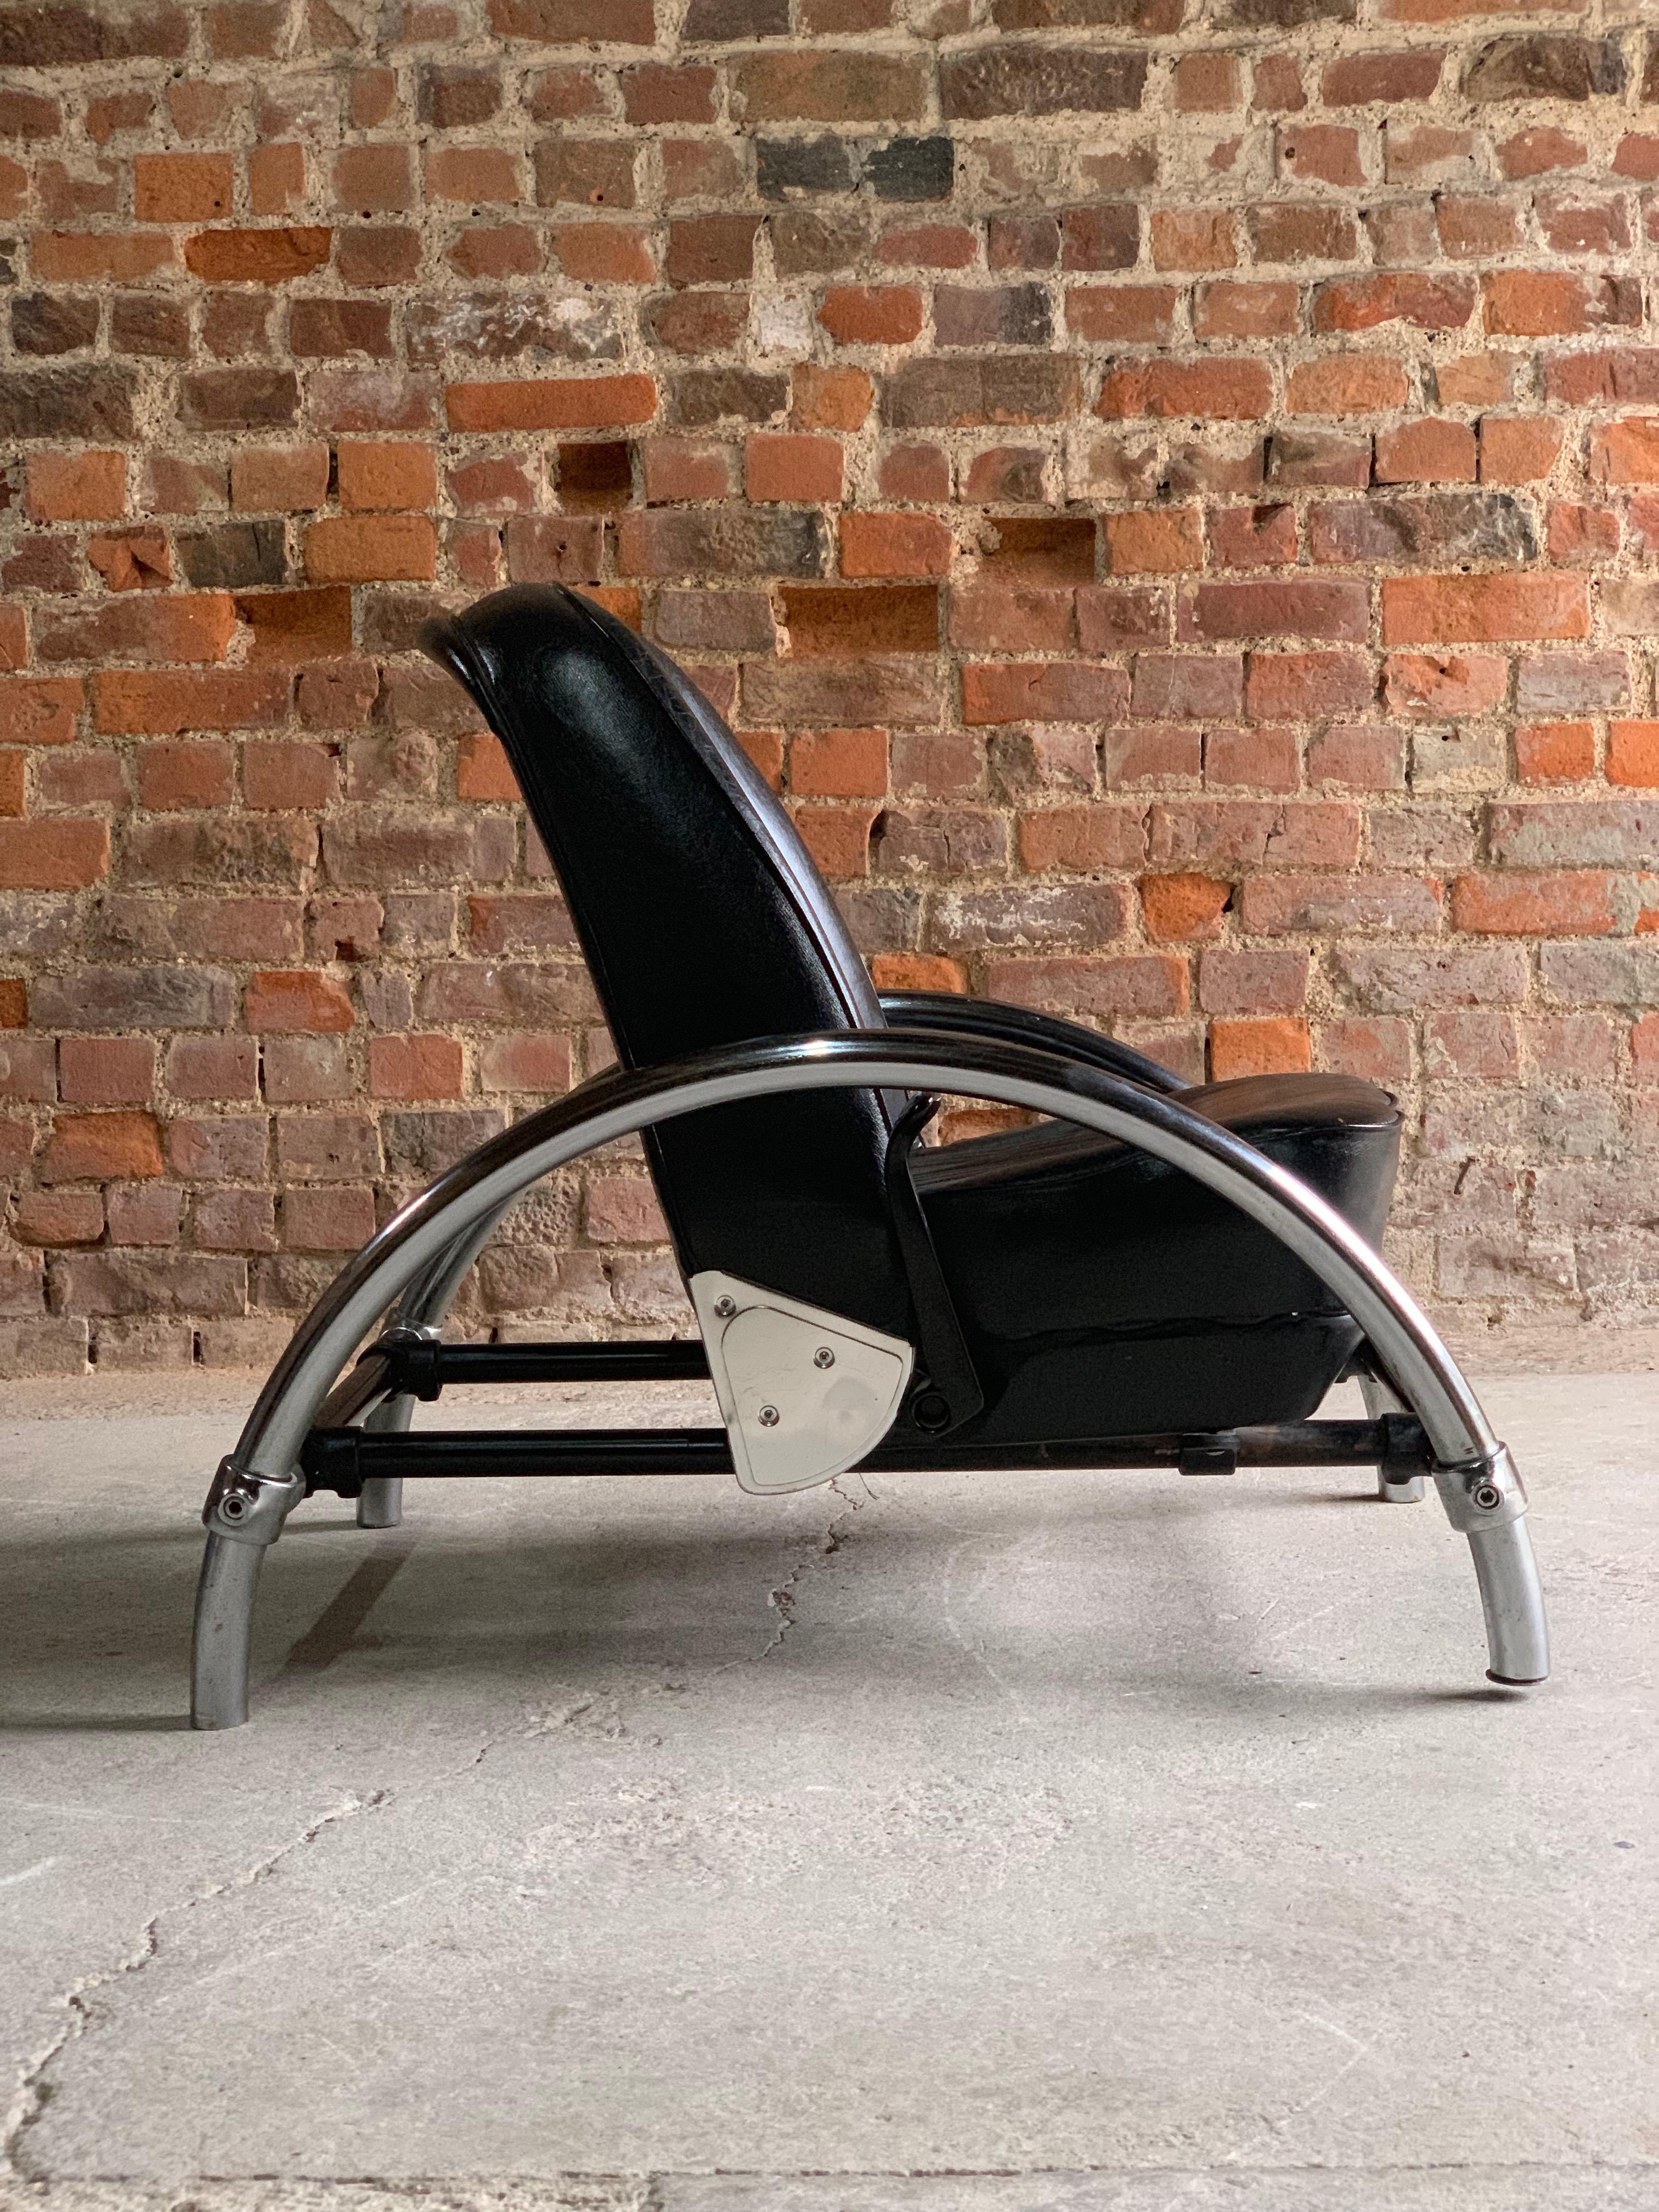 Ron Arad Rover chair 1981, Black leather Rover chair with reclining action.

Ron Arad said he 